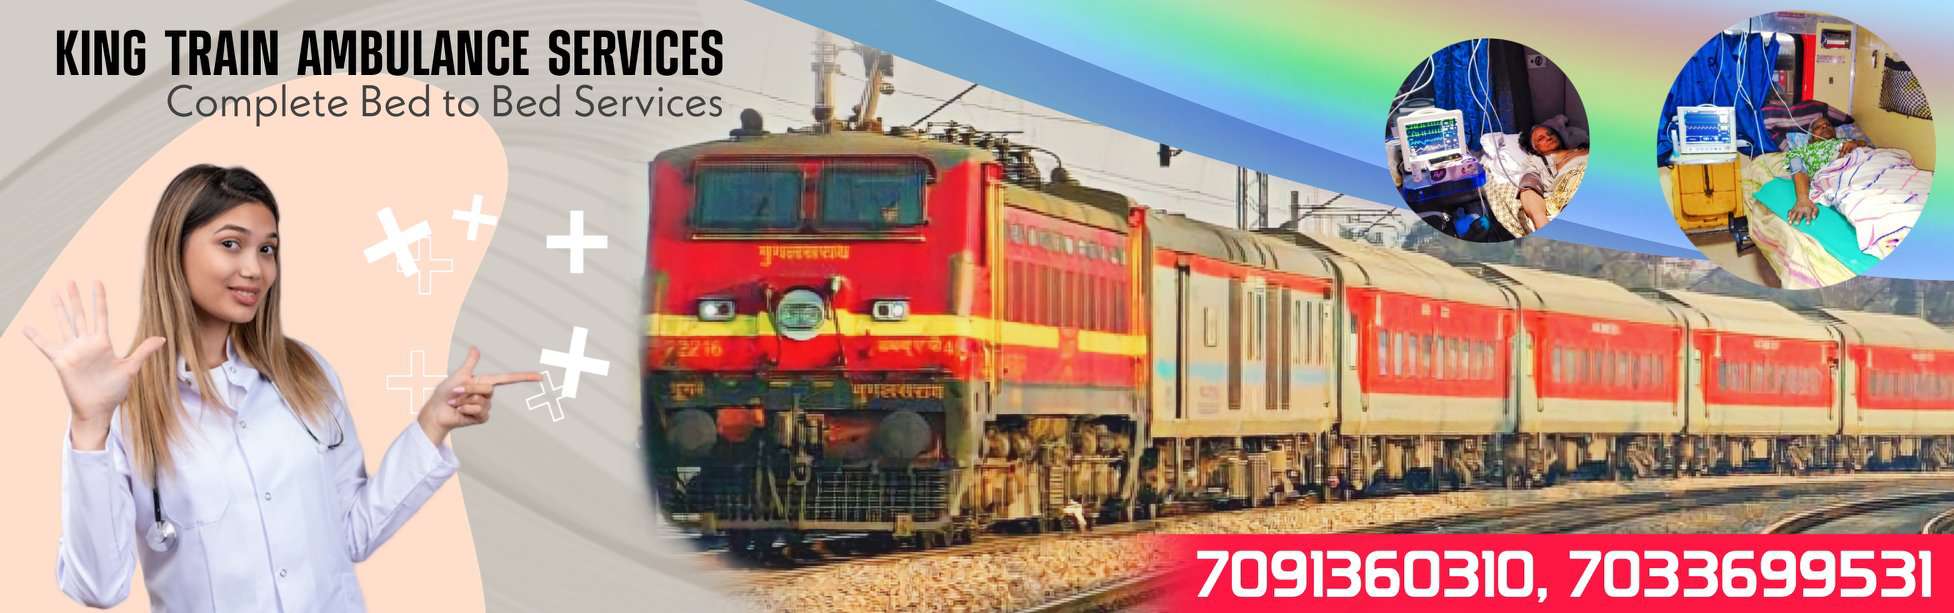 Hire Train Ambulance Services from Bangalore At Lowest Cost